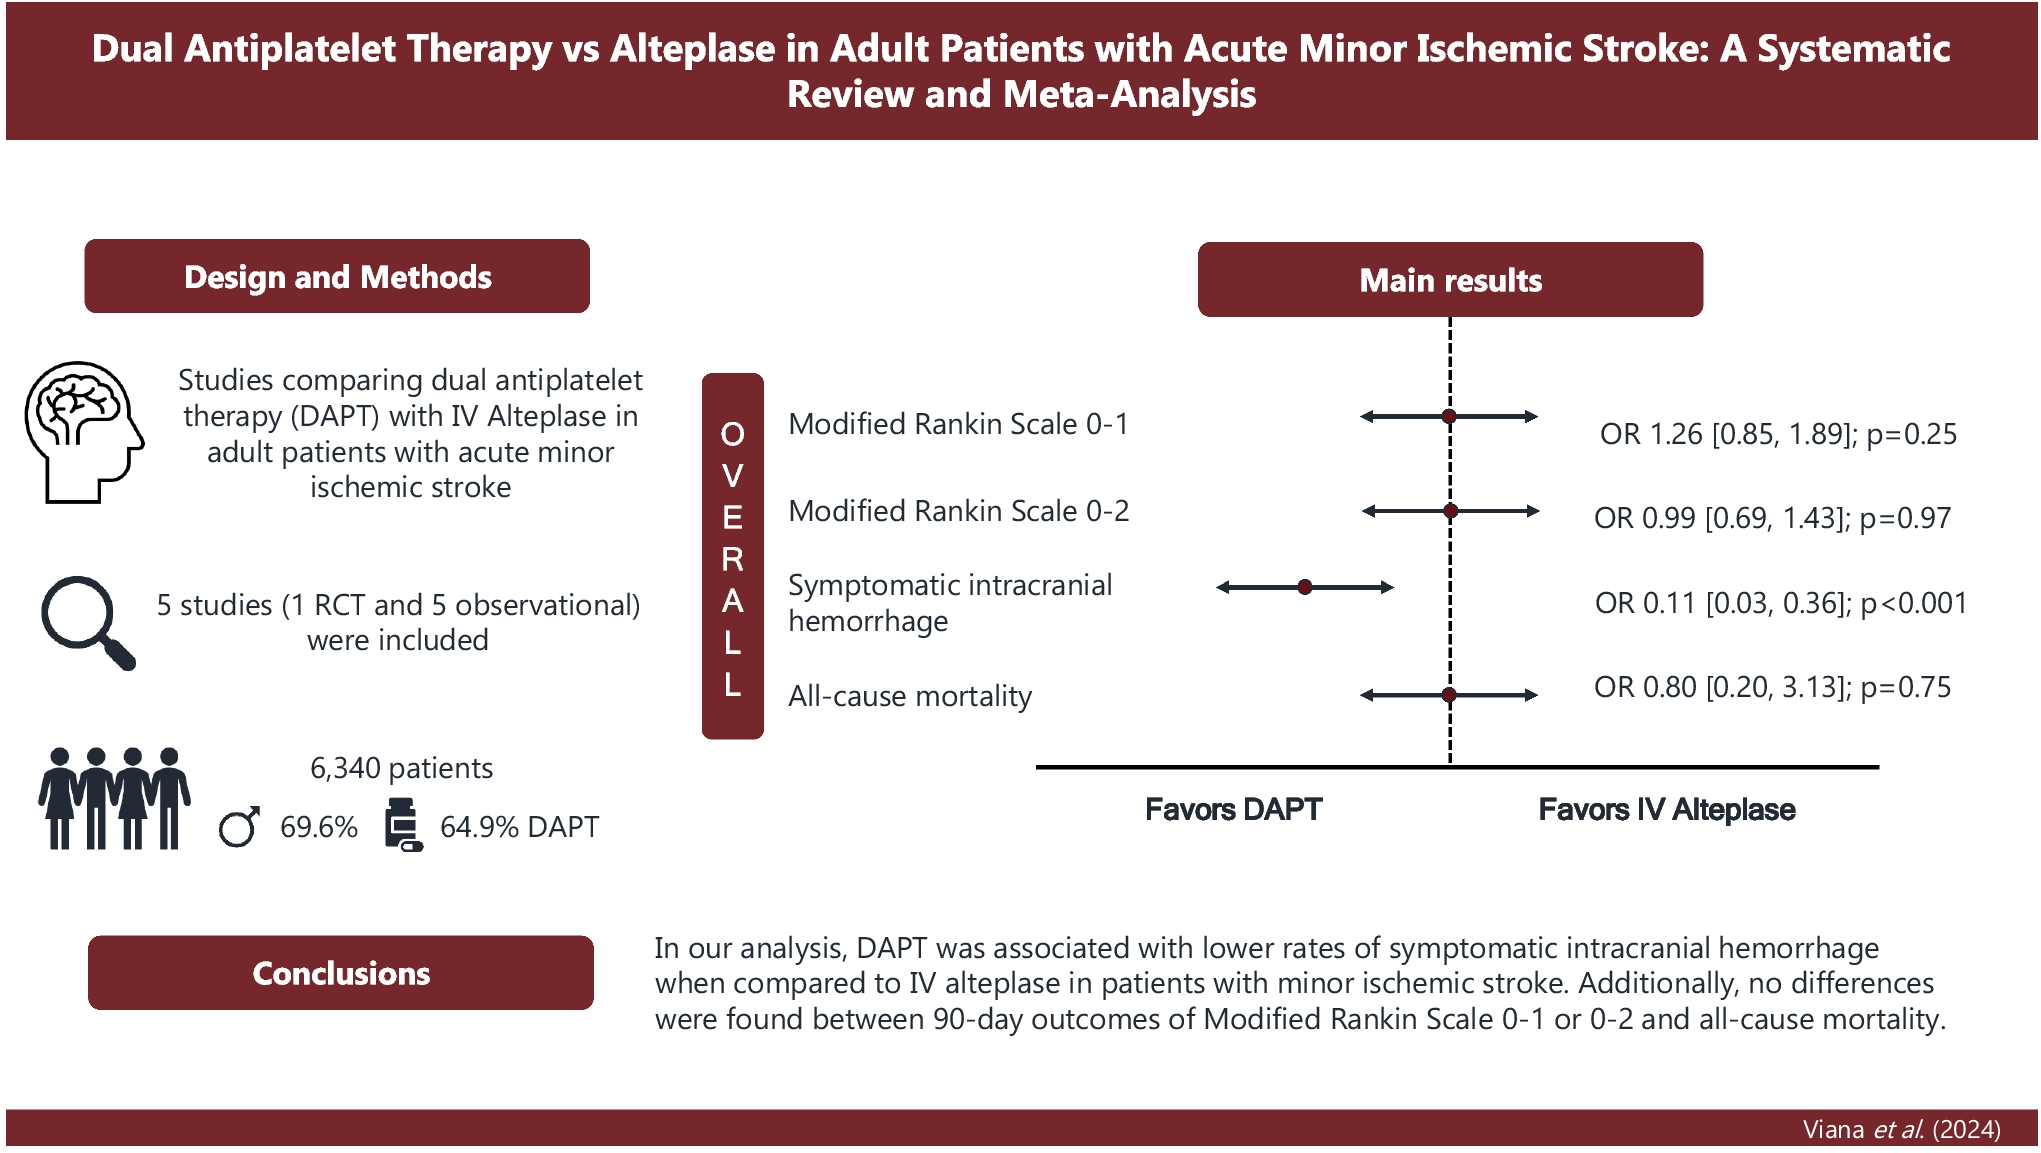 Dual Antiplatelet Therapy vs Alteplase in Adult Patients with Acute Minor Ischemic Stroke: A Systematic Review and Meta-Analysis